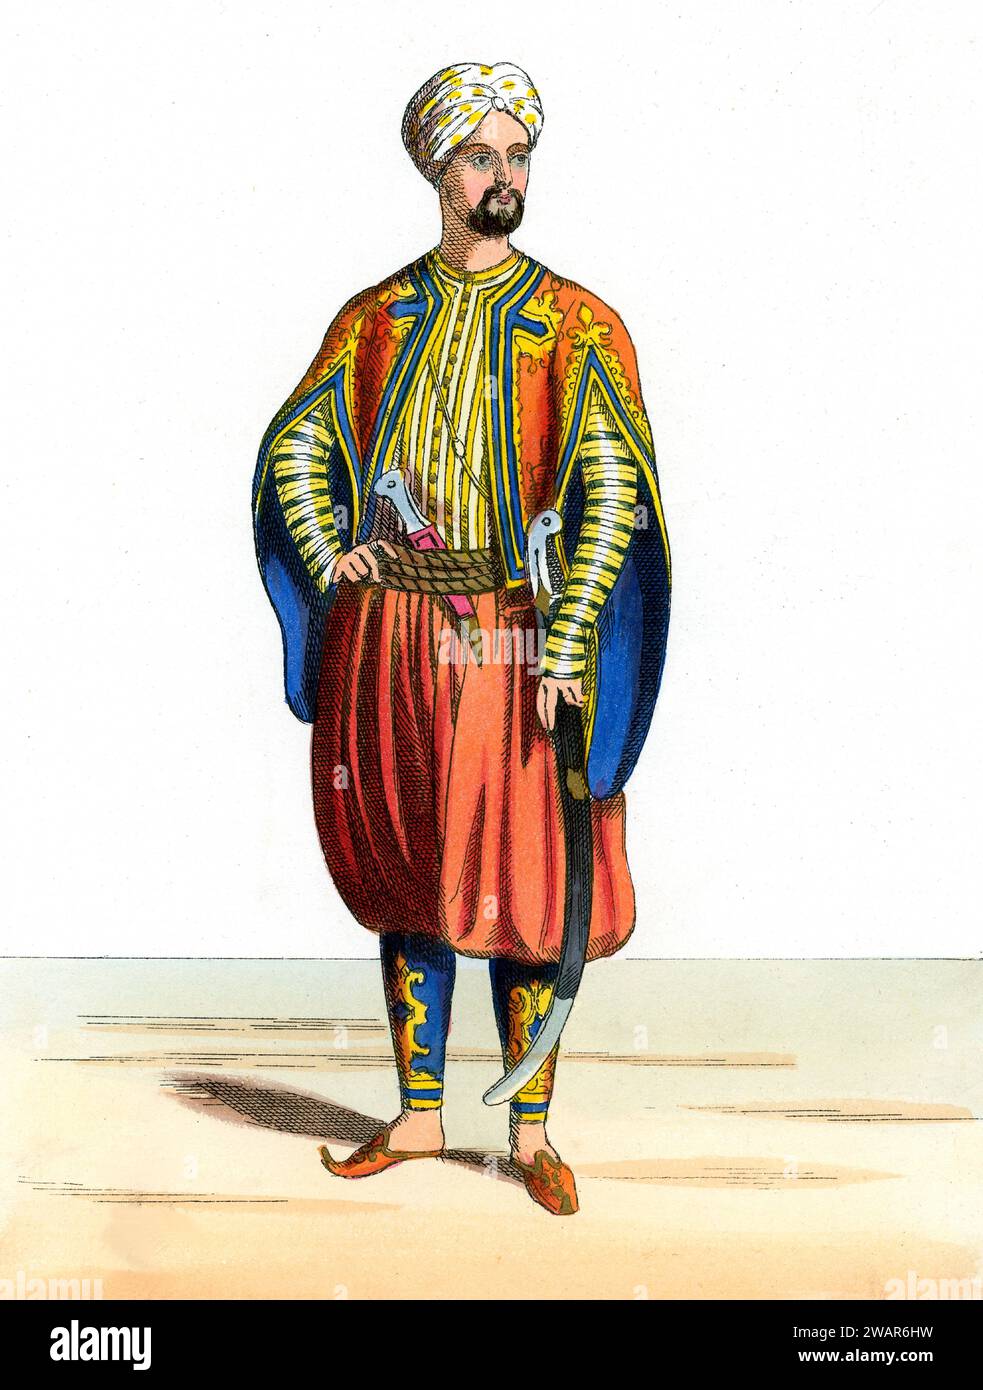 Full-length Portrait of Mamluk aka Mamaluk, Mameluke or Mameluk, Mercenary, Slave soldier or Freed Slave Fighting for Muslim Armies in the Middle East during the Middle Ages. c19th coloured engraving or illustration. Stock Photo